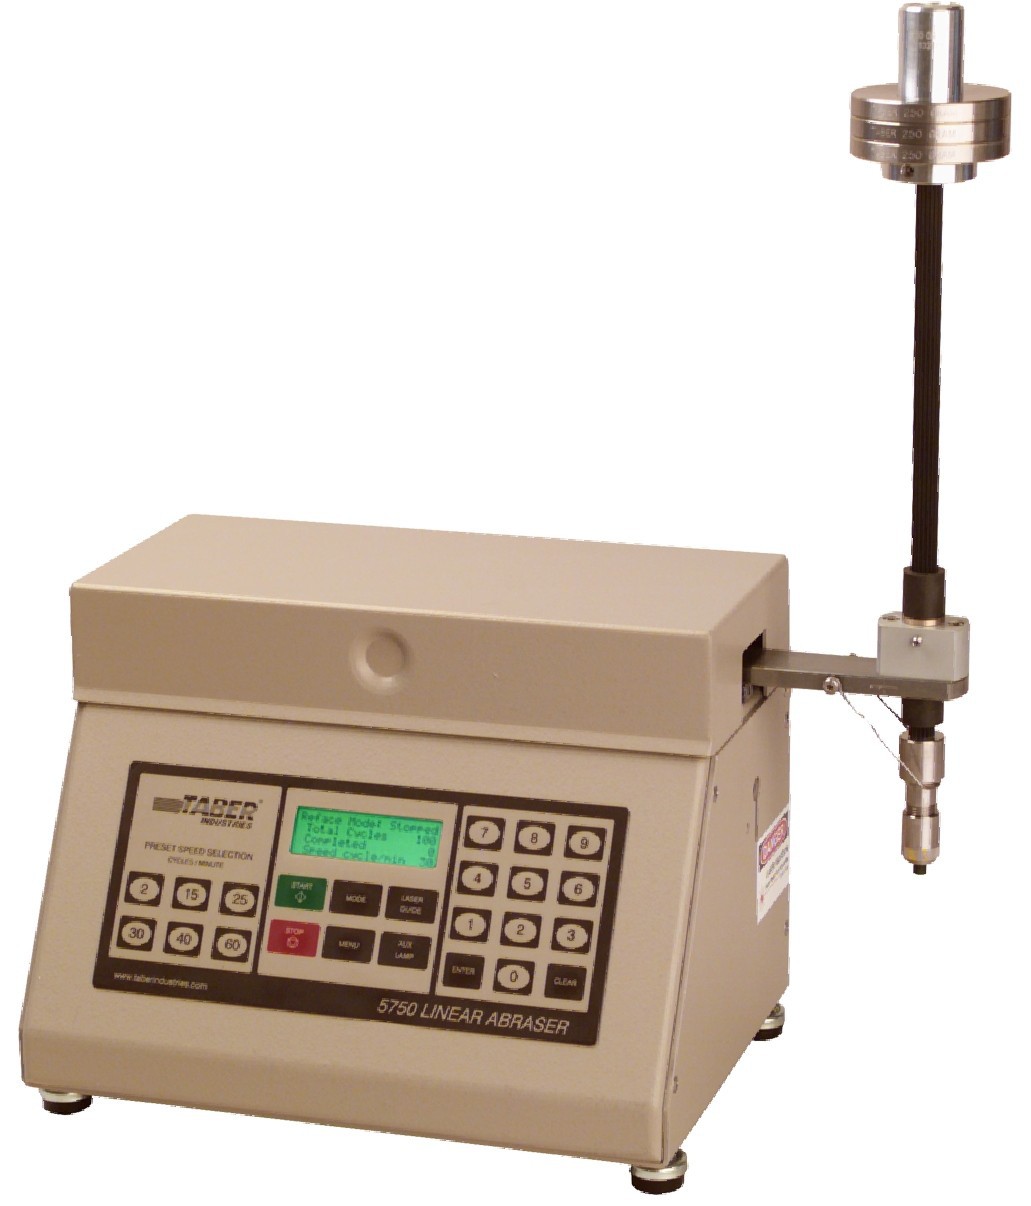 Do you know what to do before using the Taber Abrasion Tester?